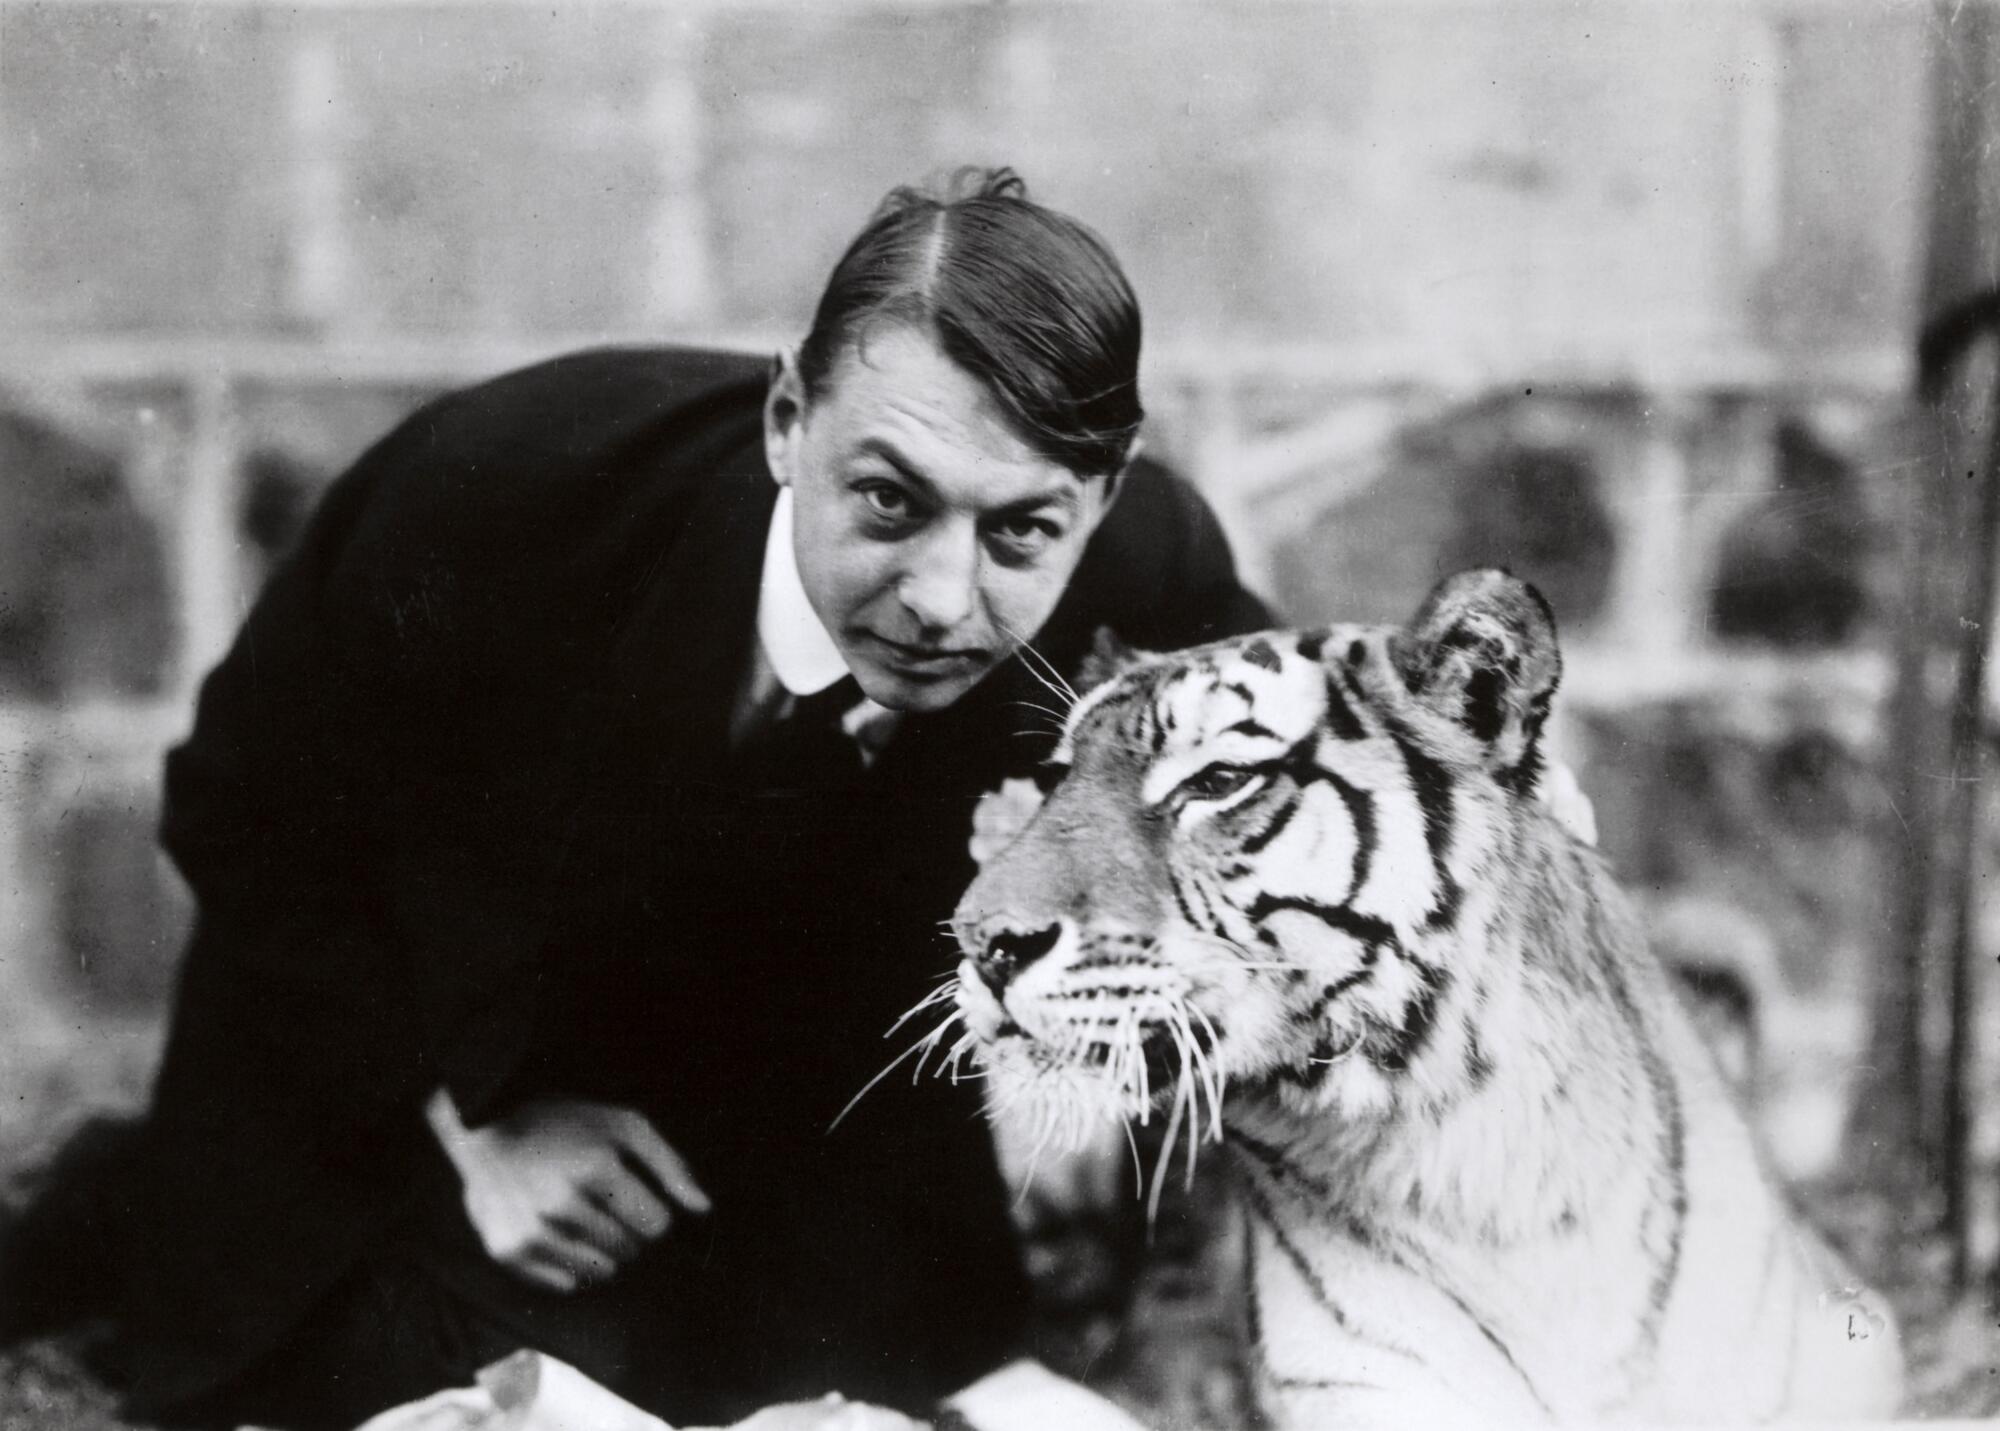 Paul Bourgeois (Sablon) and tiger, undated, from the collection of EYE Filmmuseum.